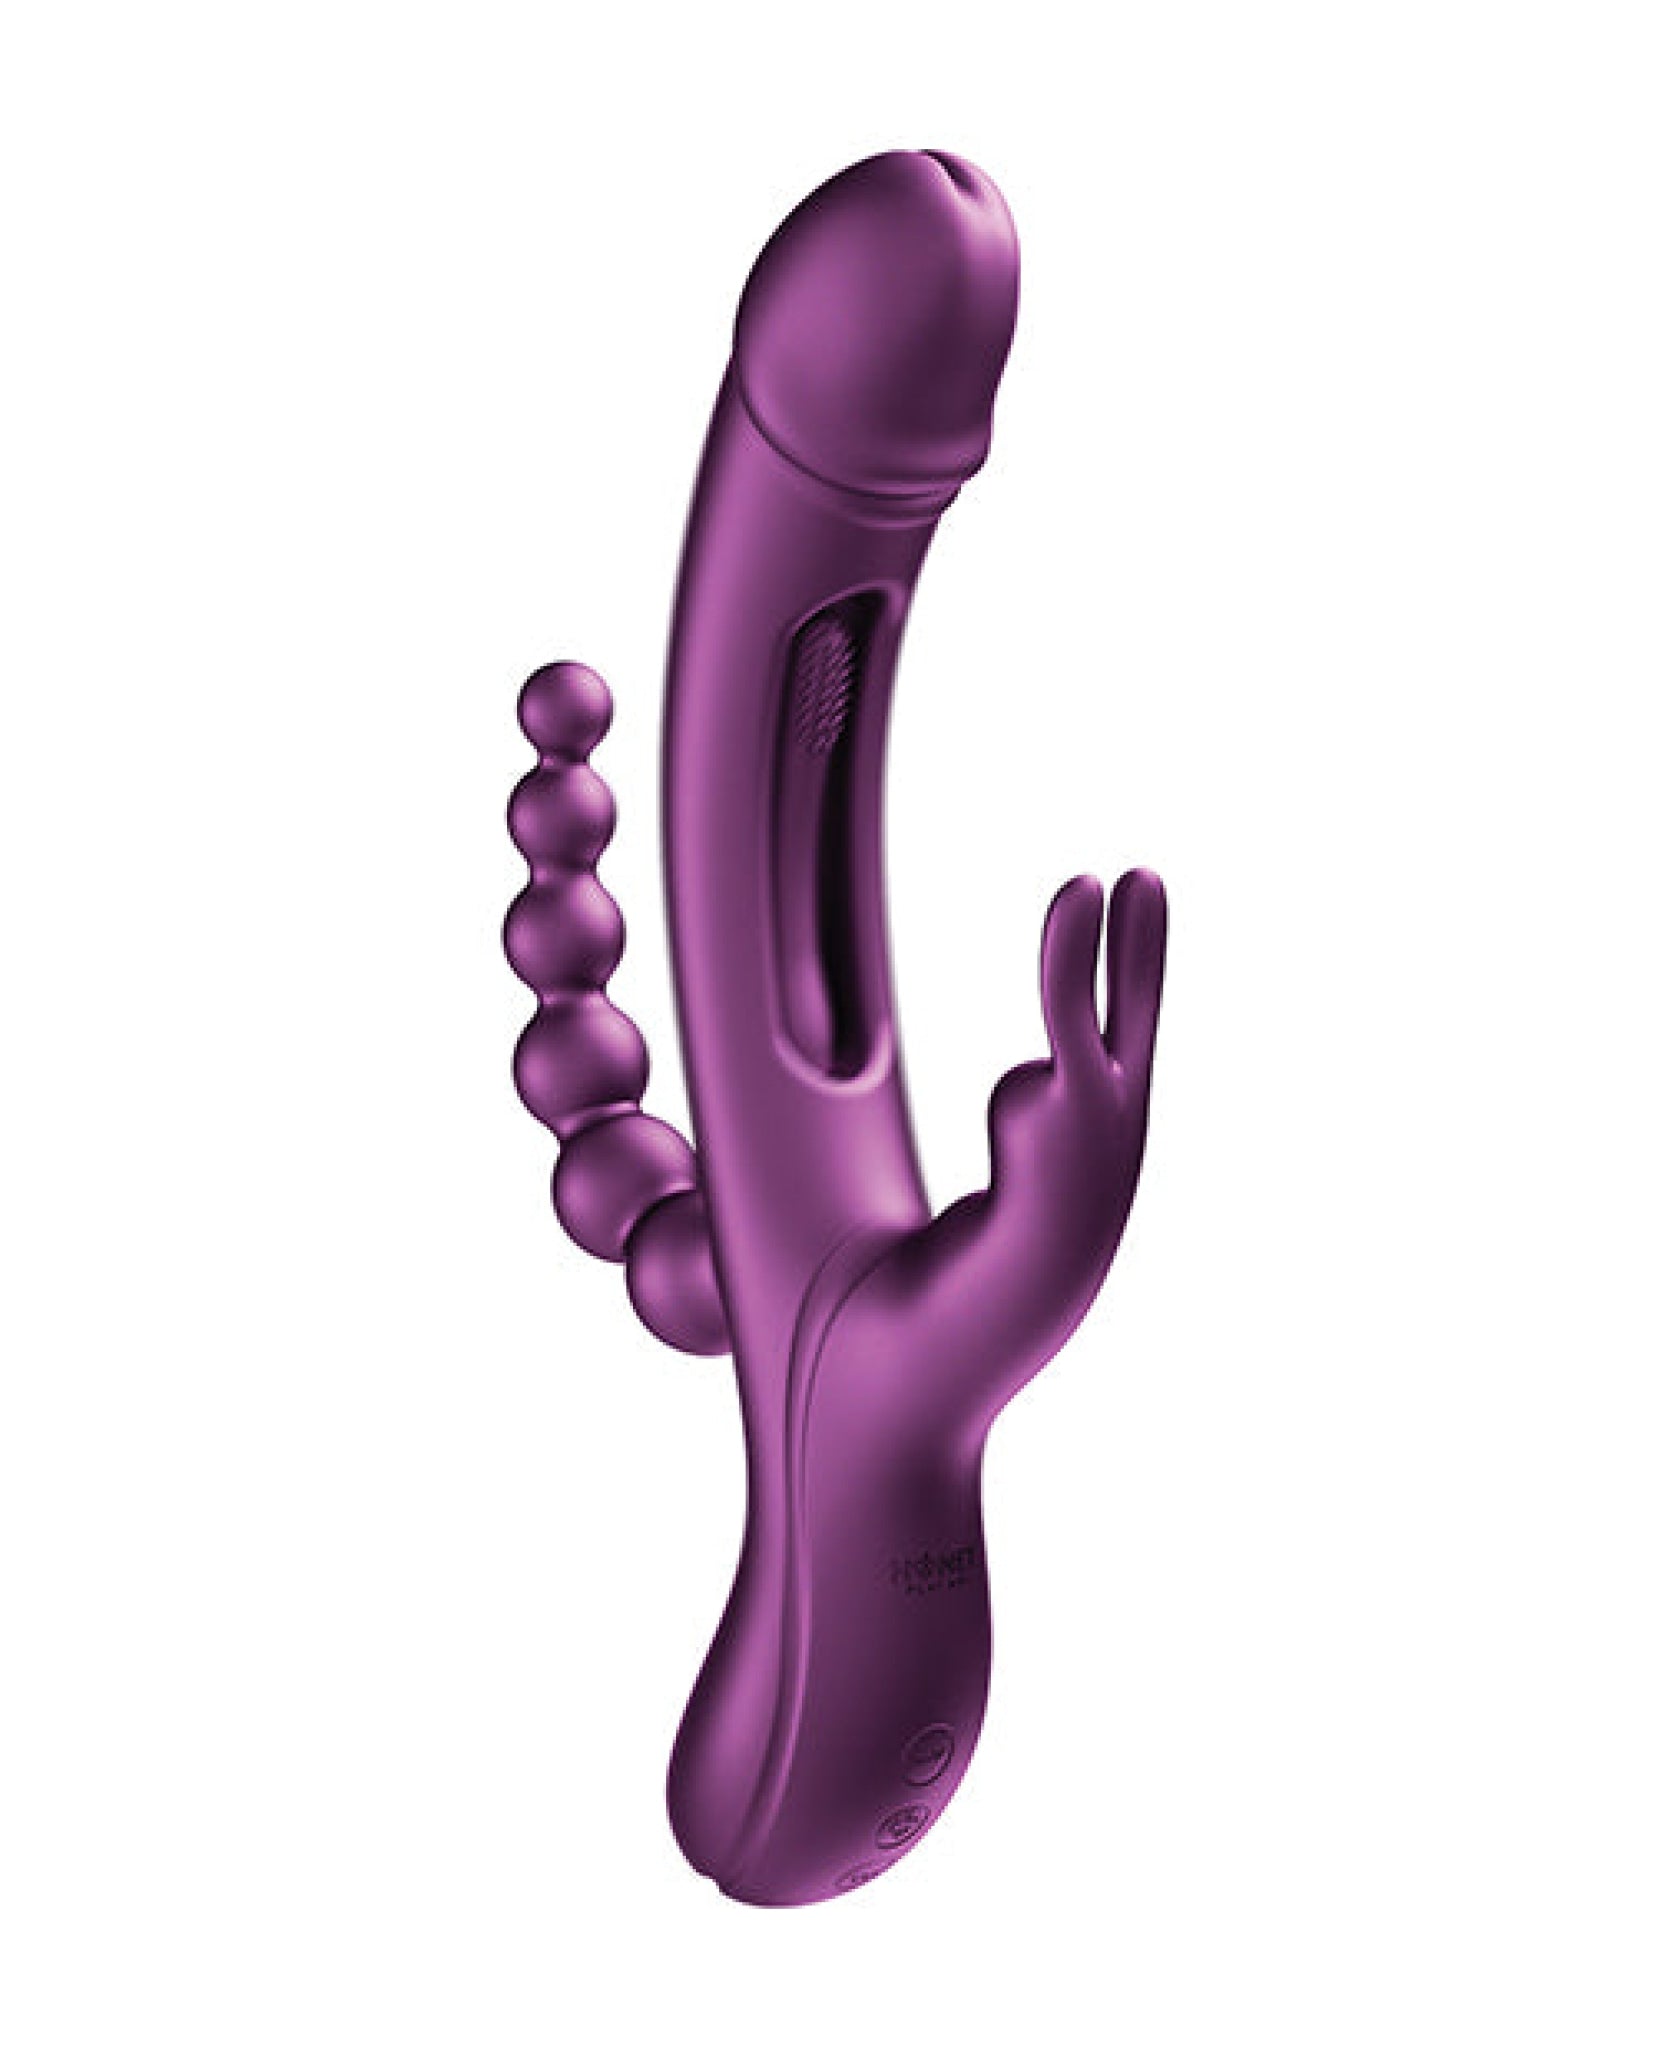 Trilux Kinky Finger Rabbit Vibrator With Anal Beads Uc Global Trade INChoney Play B